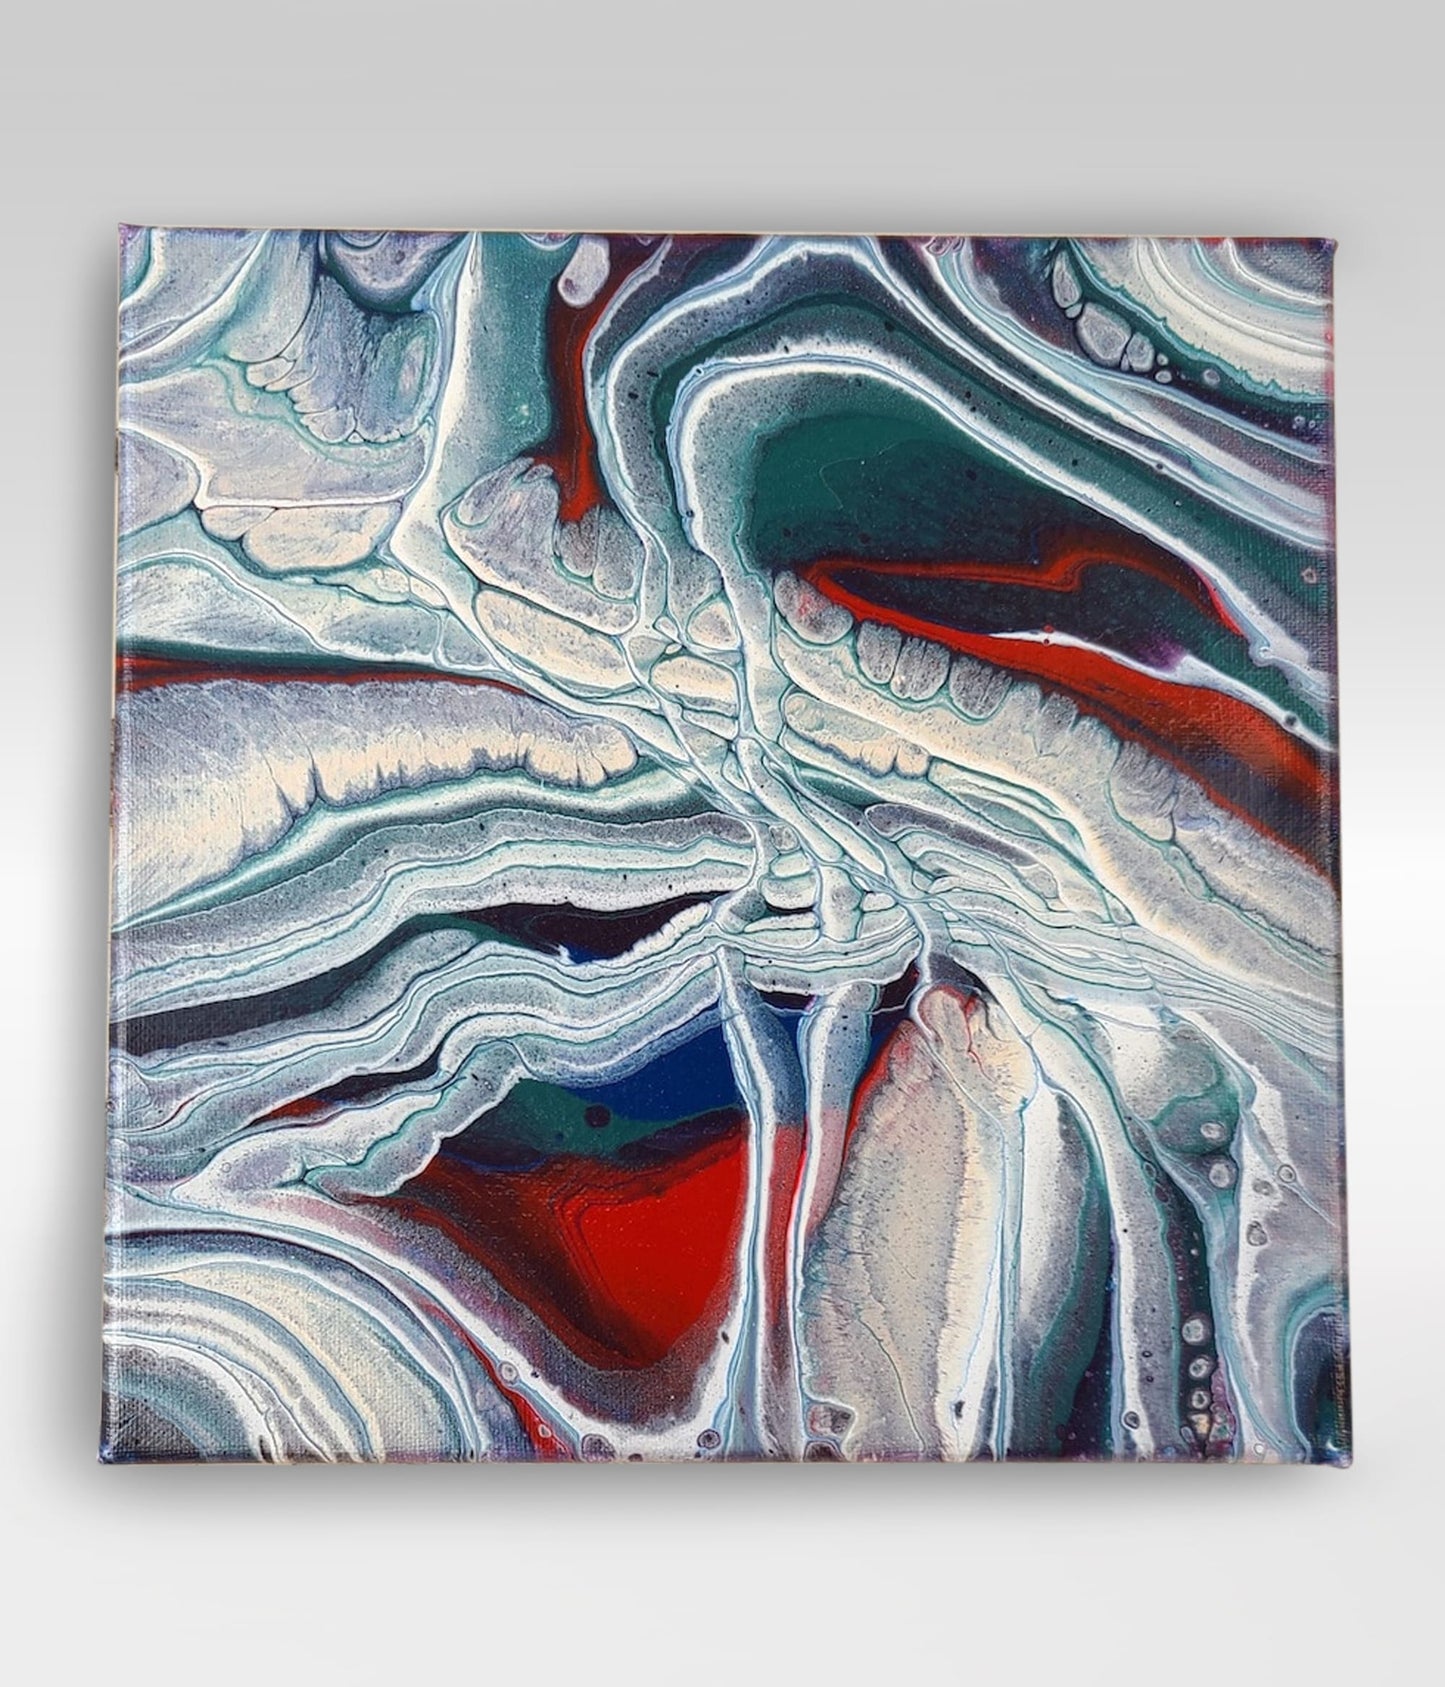 Gossamer Cave – 10 x 10 Acrylic Pour Painting On Canvas